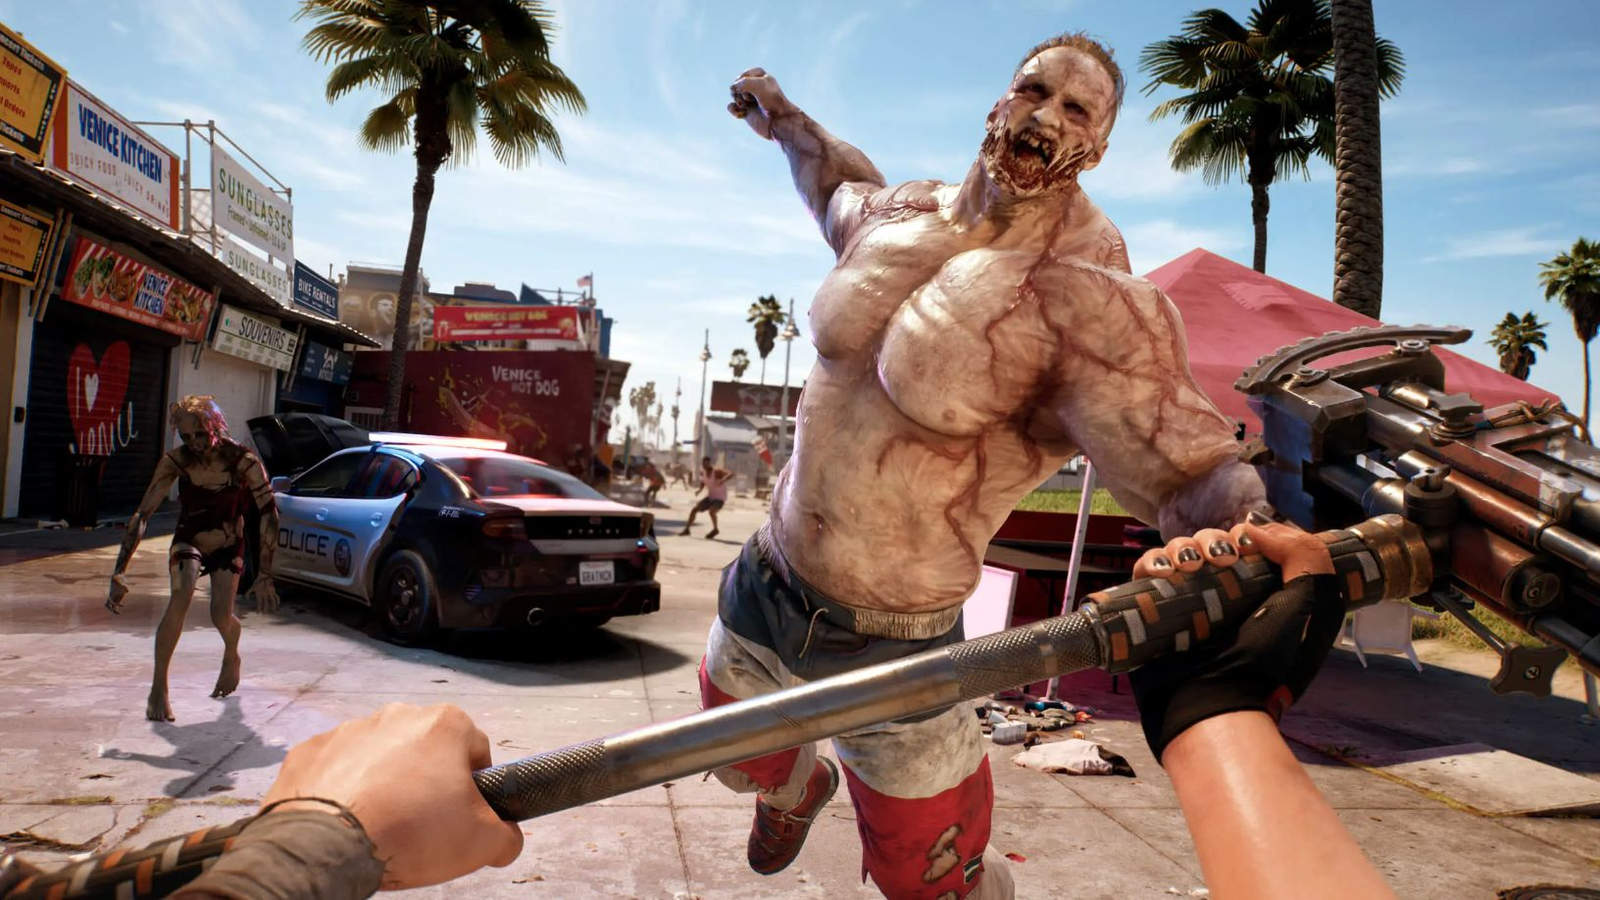 Has Dead Island 2 Been Cancelled?